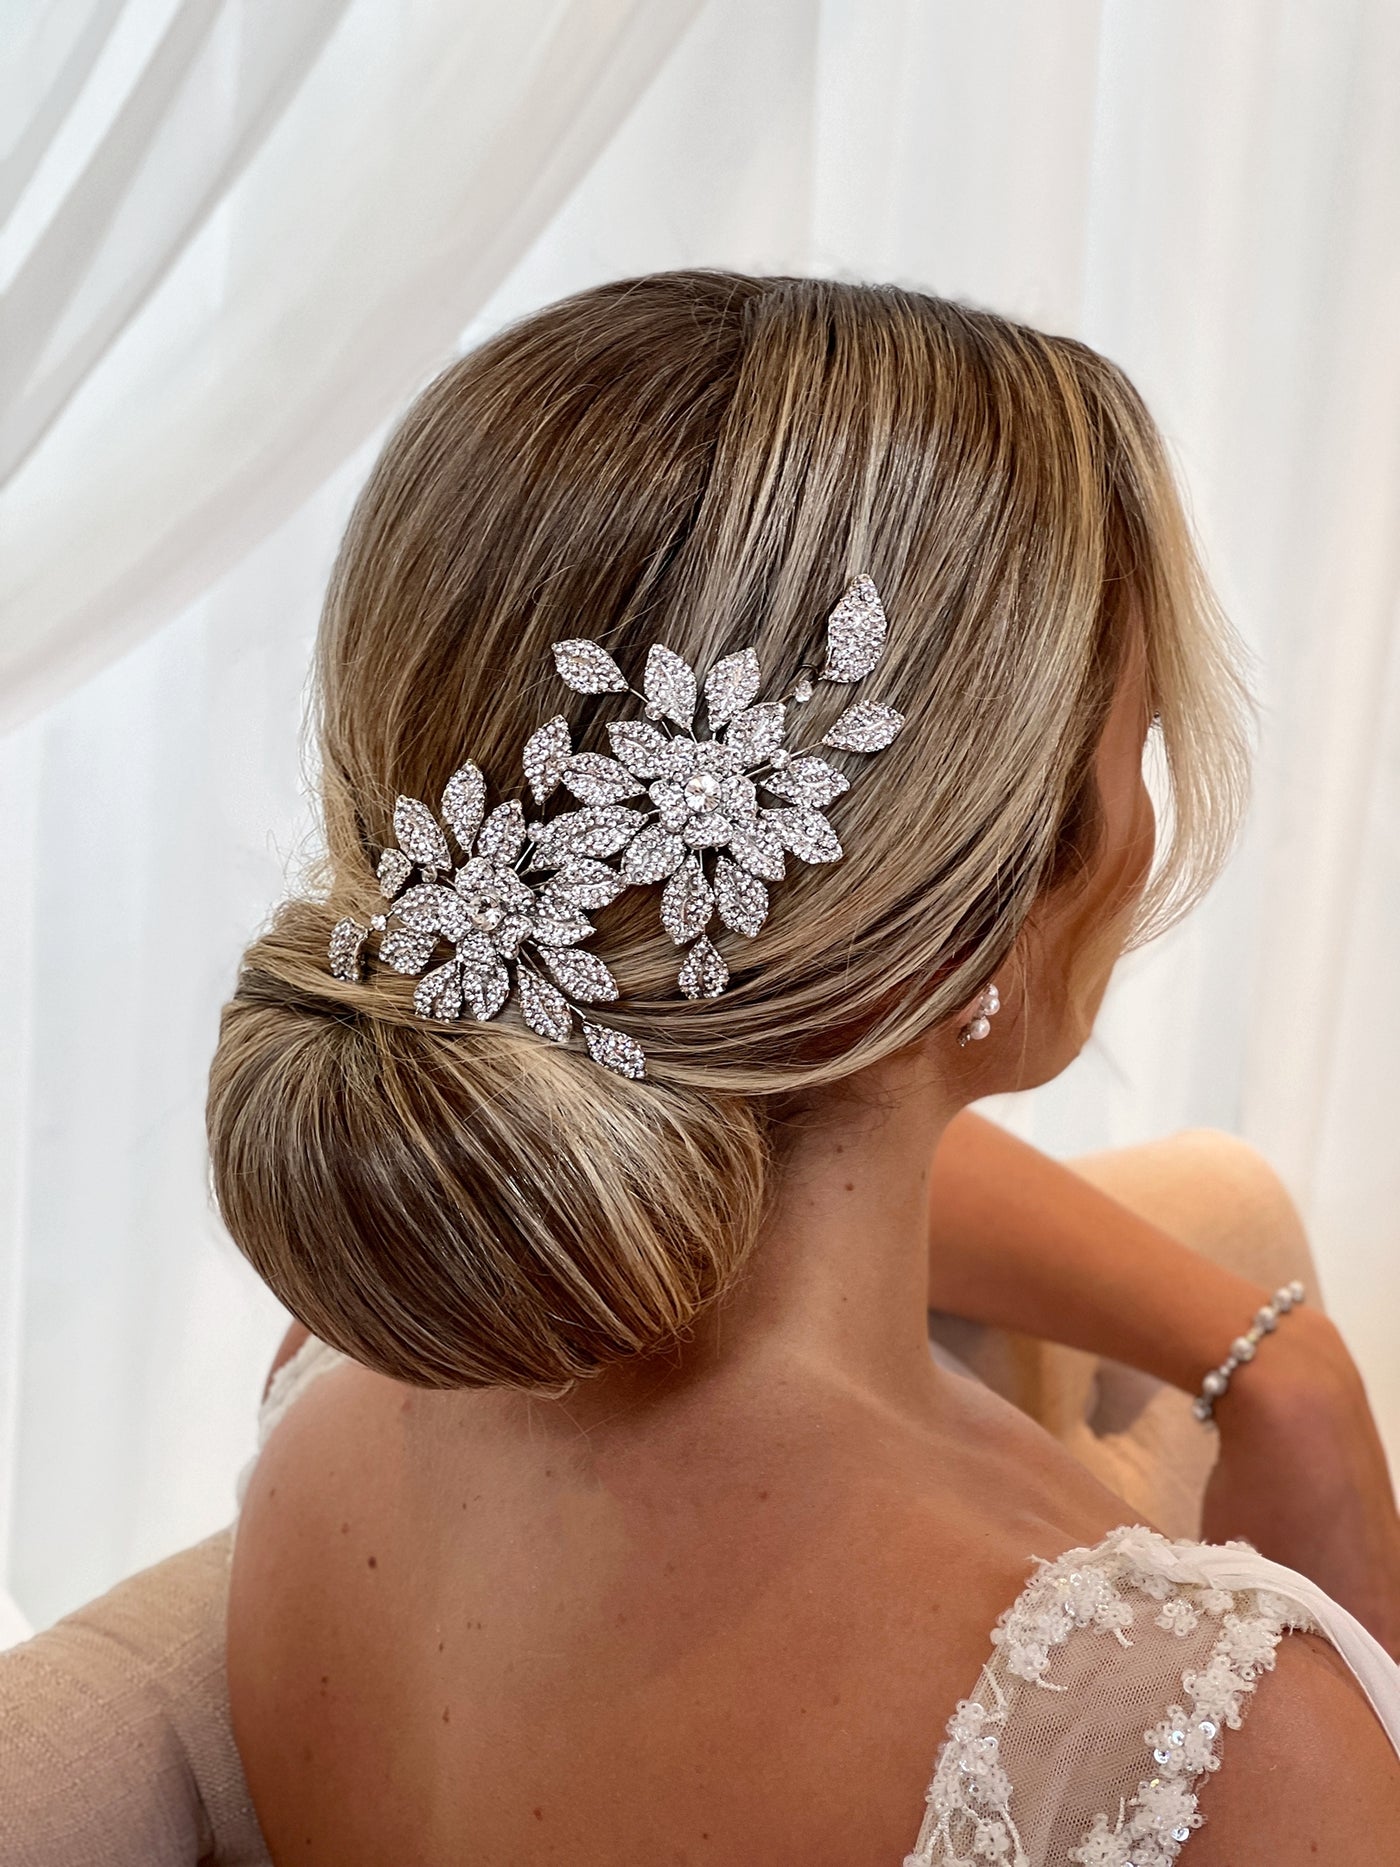 female model wearing bridal hair comb with crystalized silver flowers and leaves above an updo